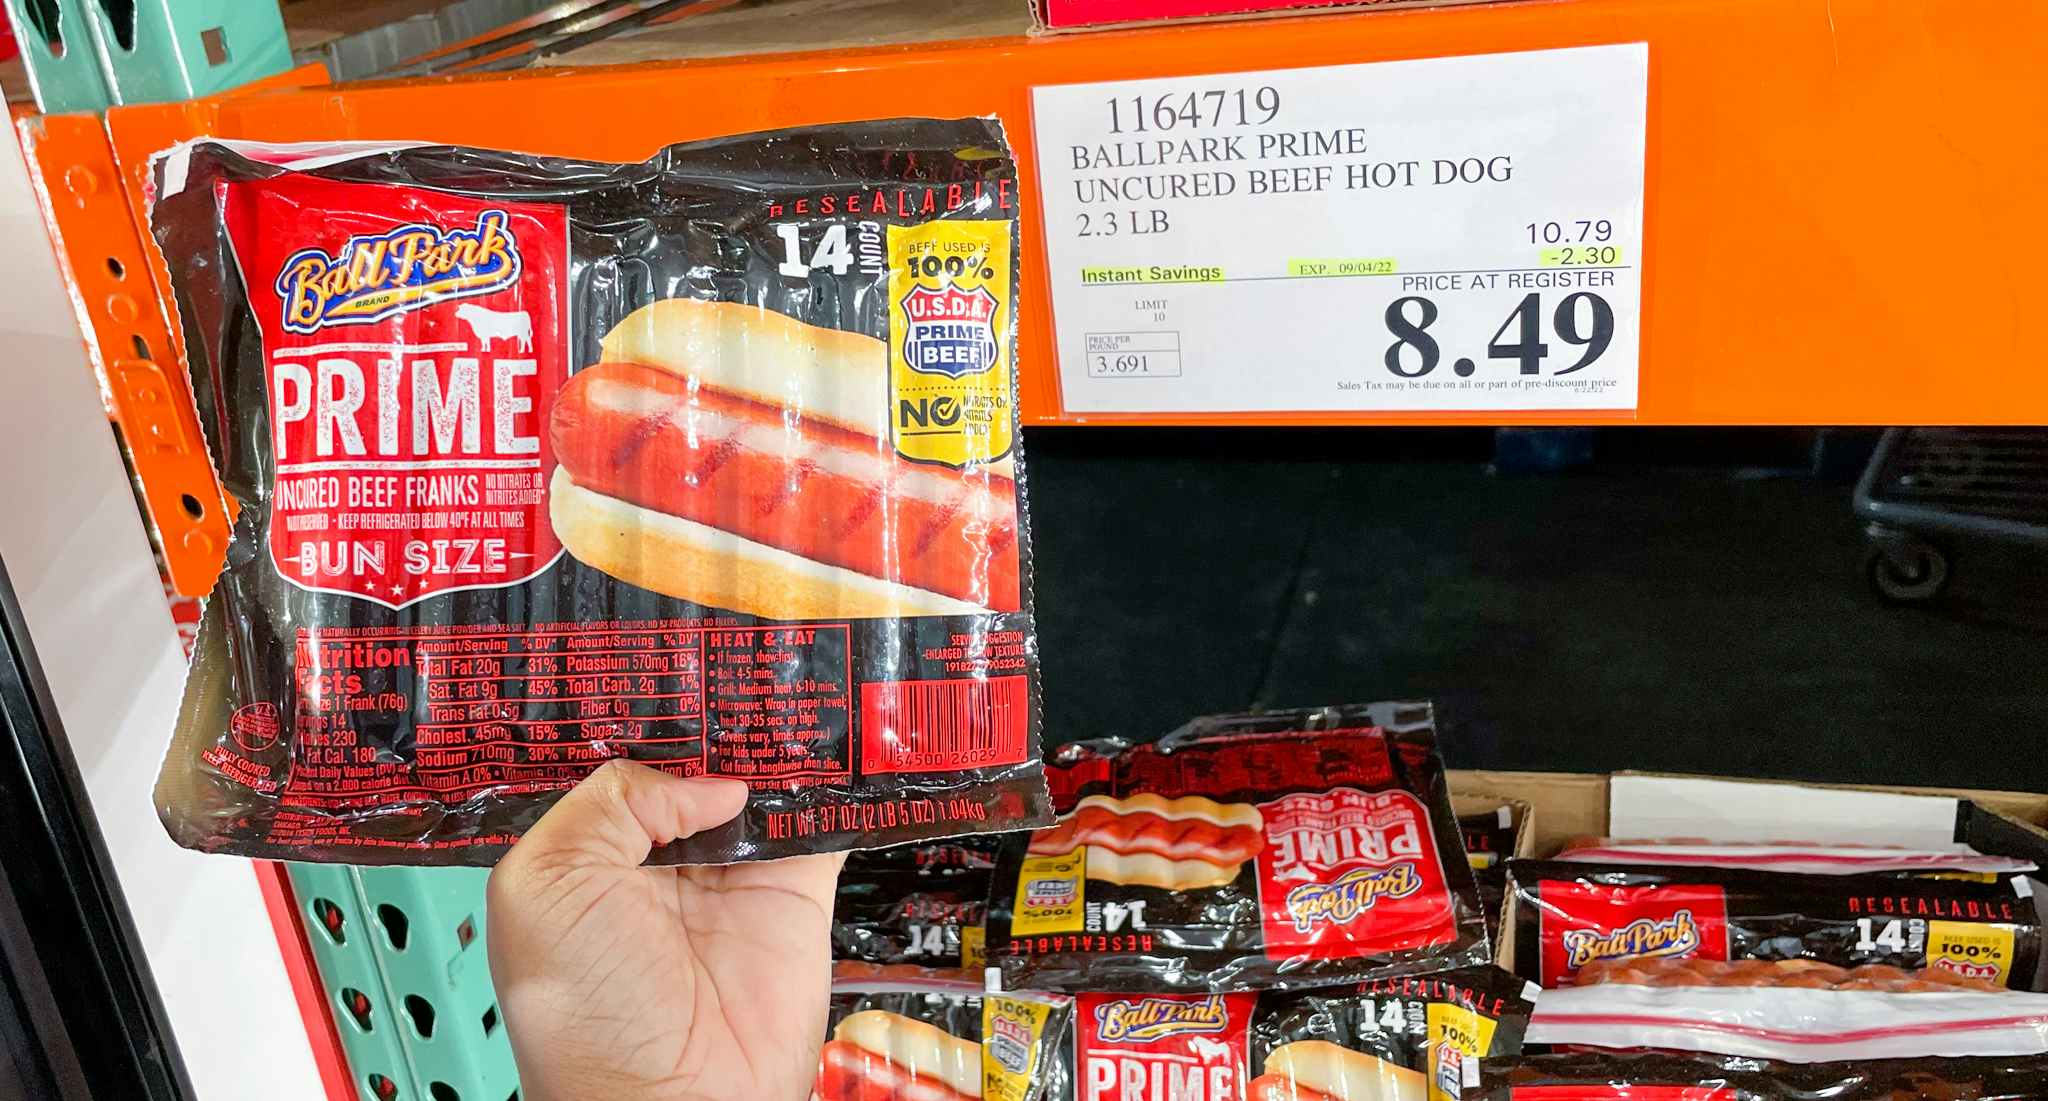 hand held hot dogs near sale sign at costco